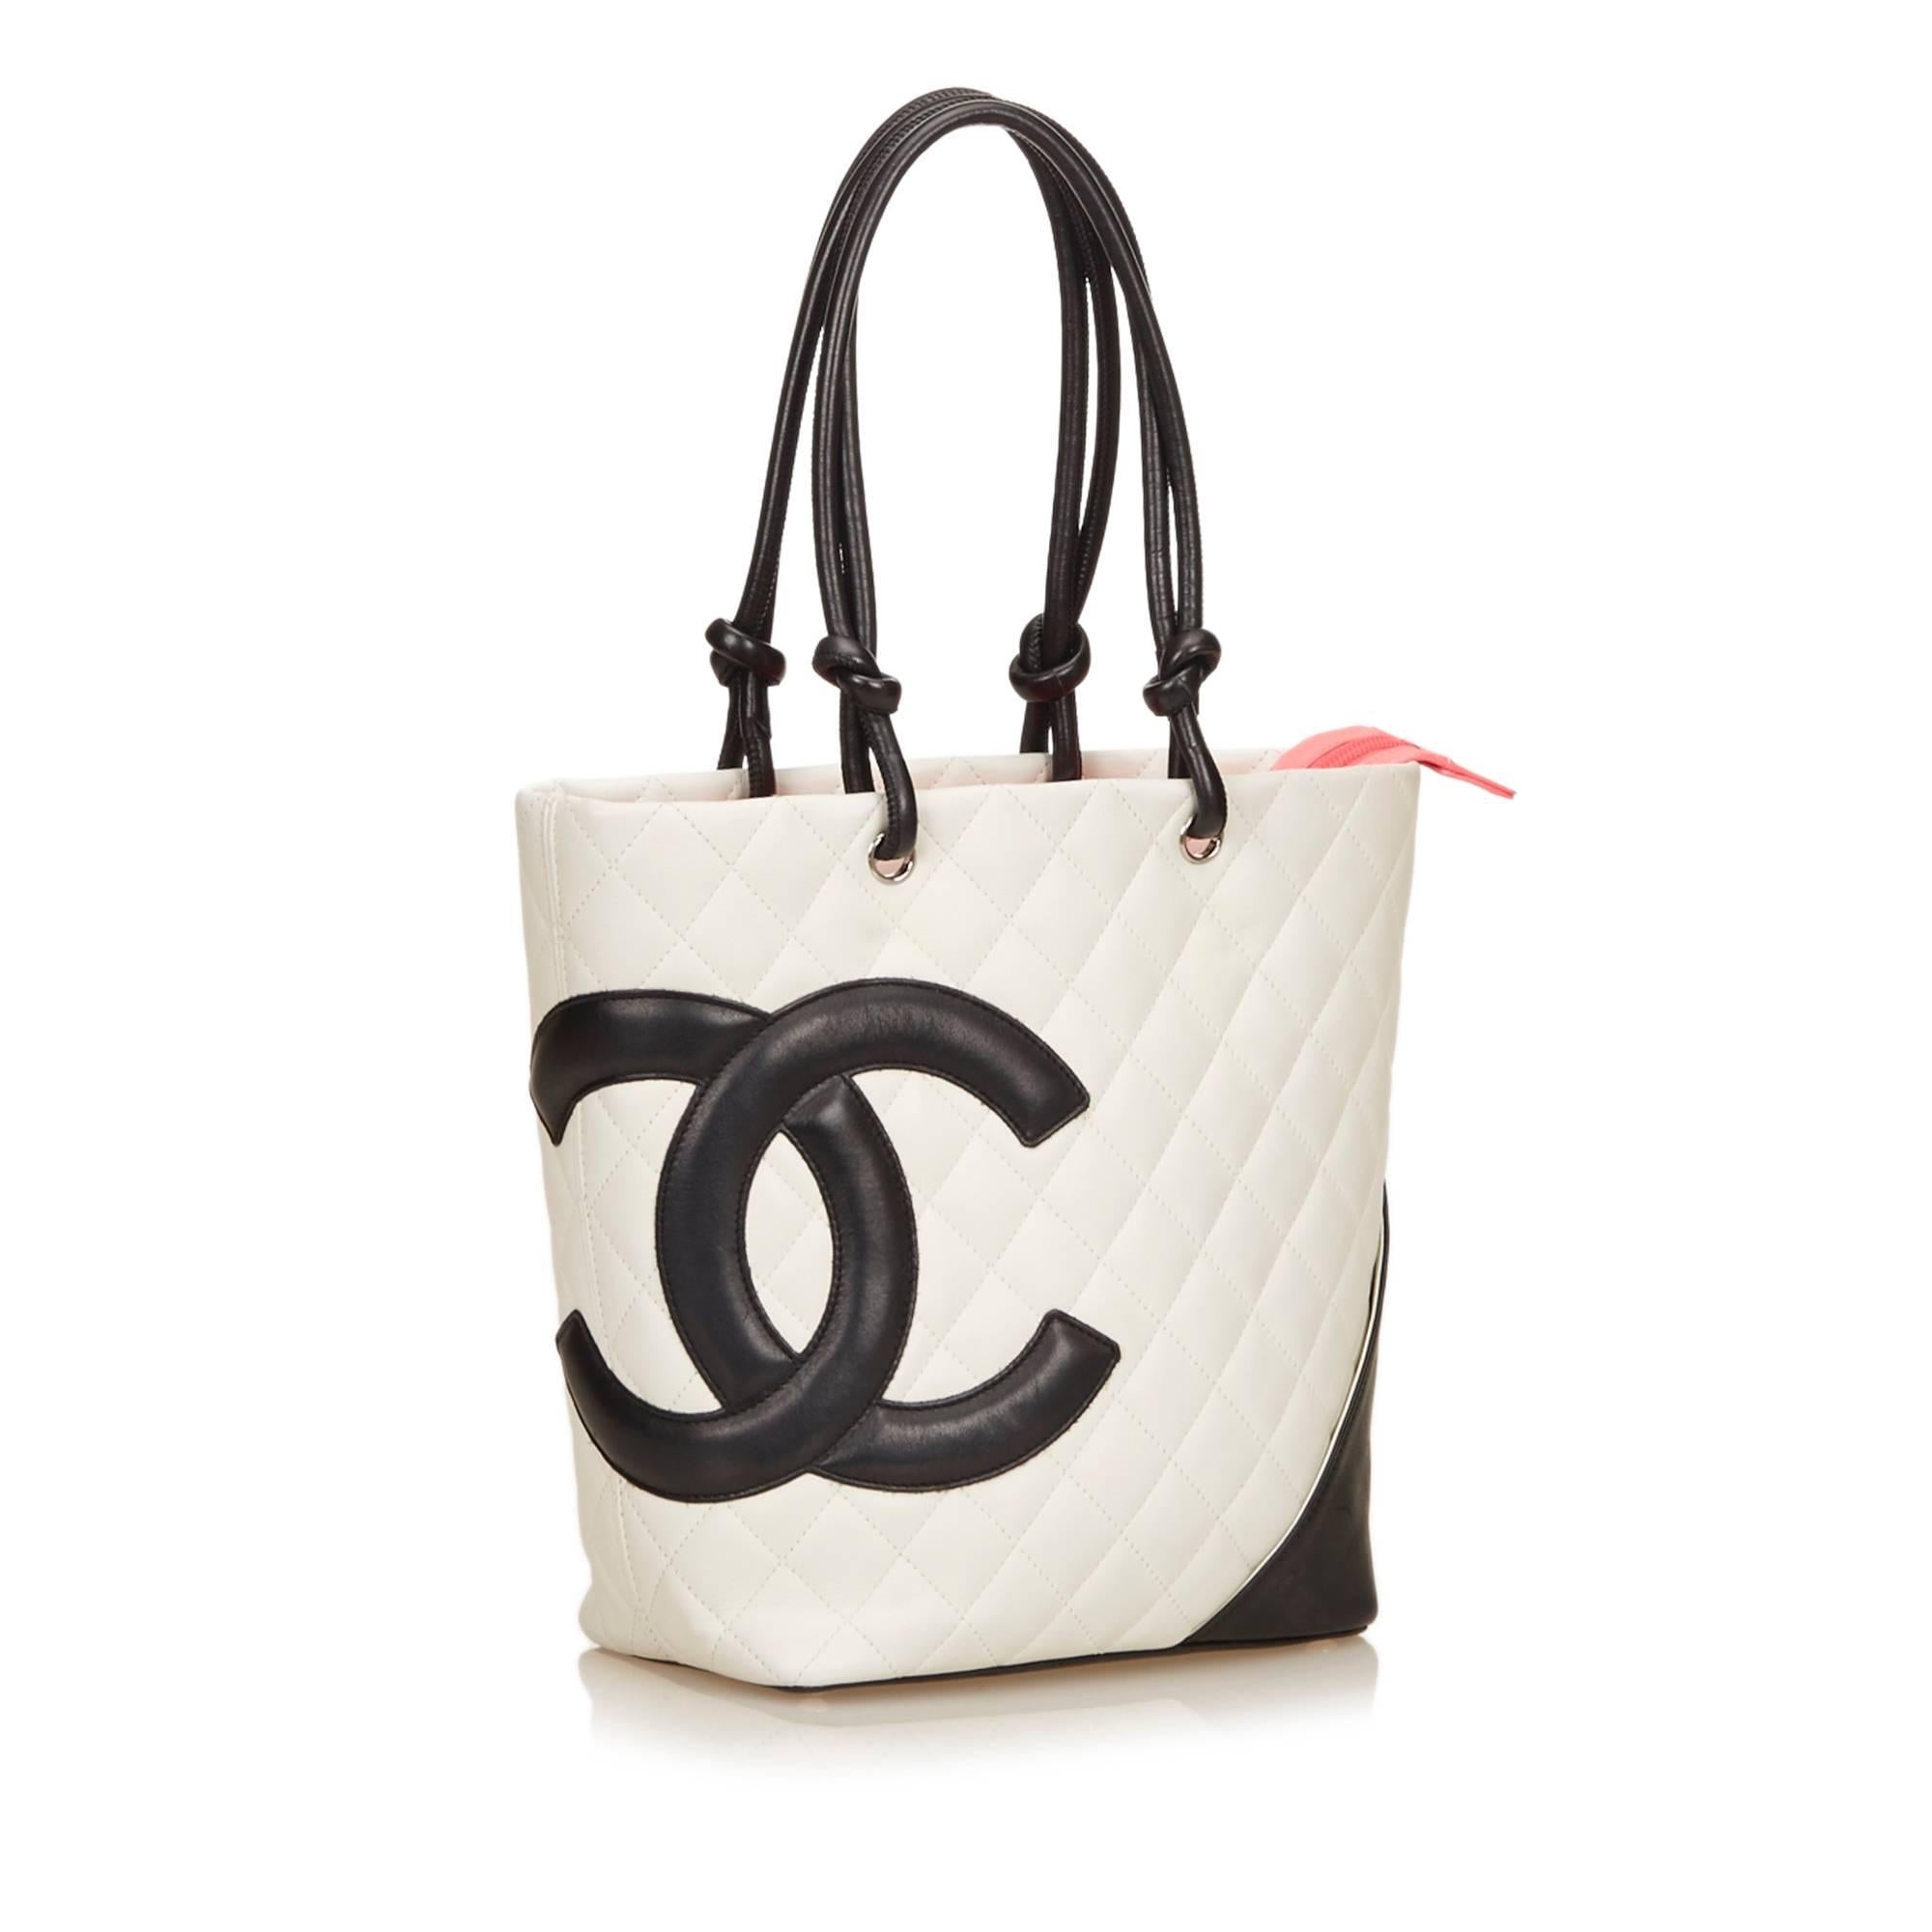 The Cambon Ligne Bucket Tote features a quilted lambskin leather body and interlocking Cs, rolled leather handles, an exterior back slip pocket, a top zip closure, and an interior zip pocket.

Color: Black and White